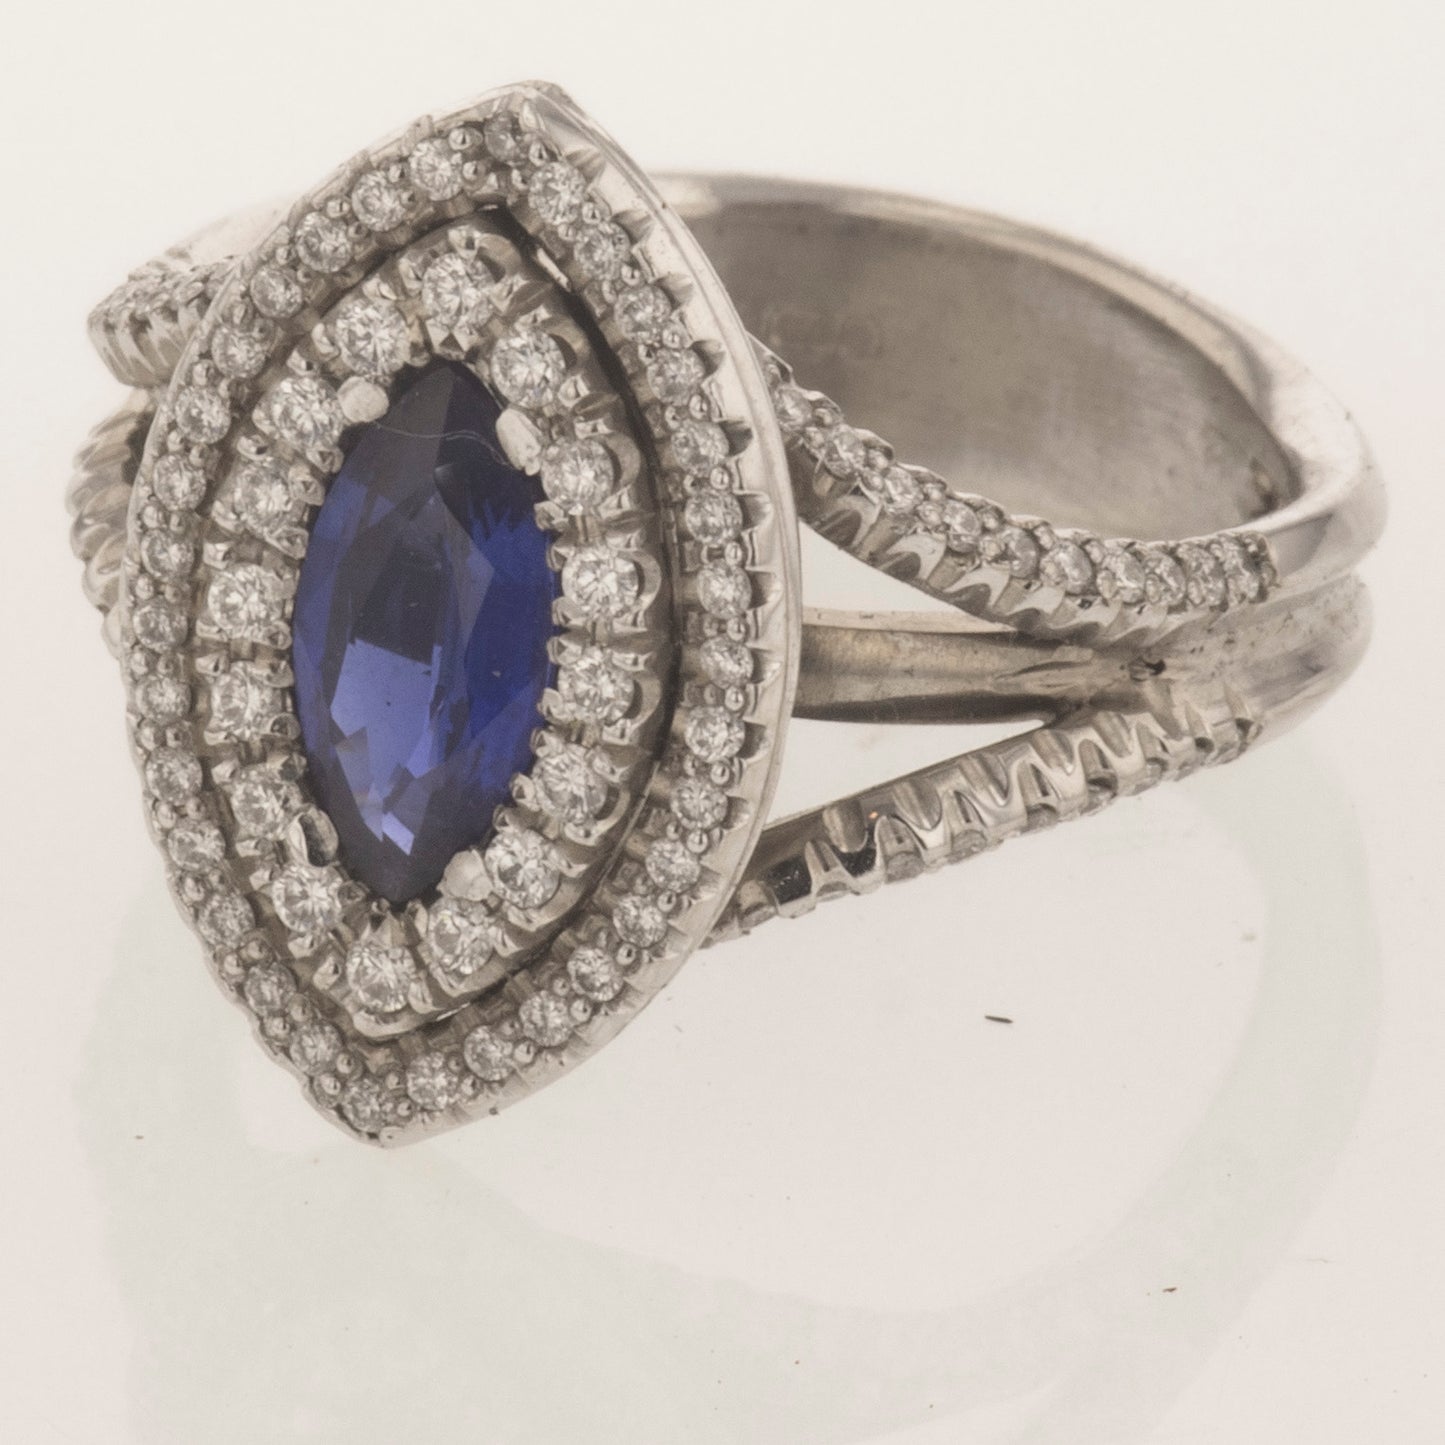 Marquise sapphire and diamonds ring